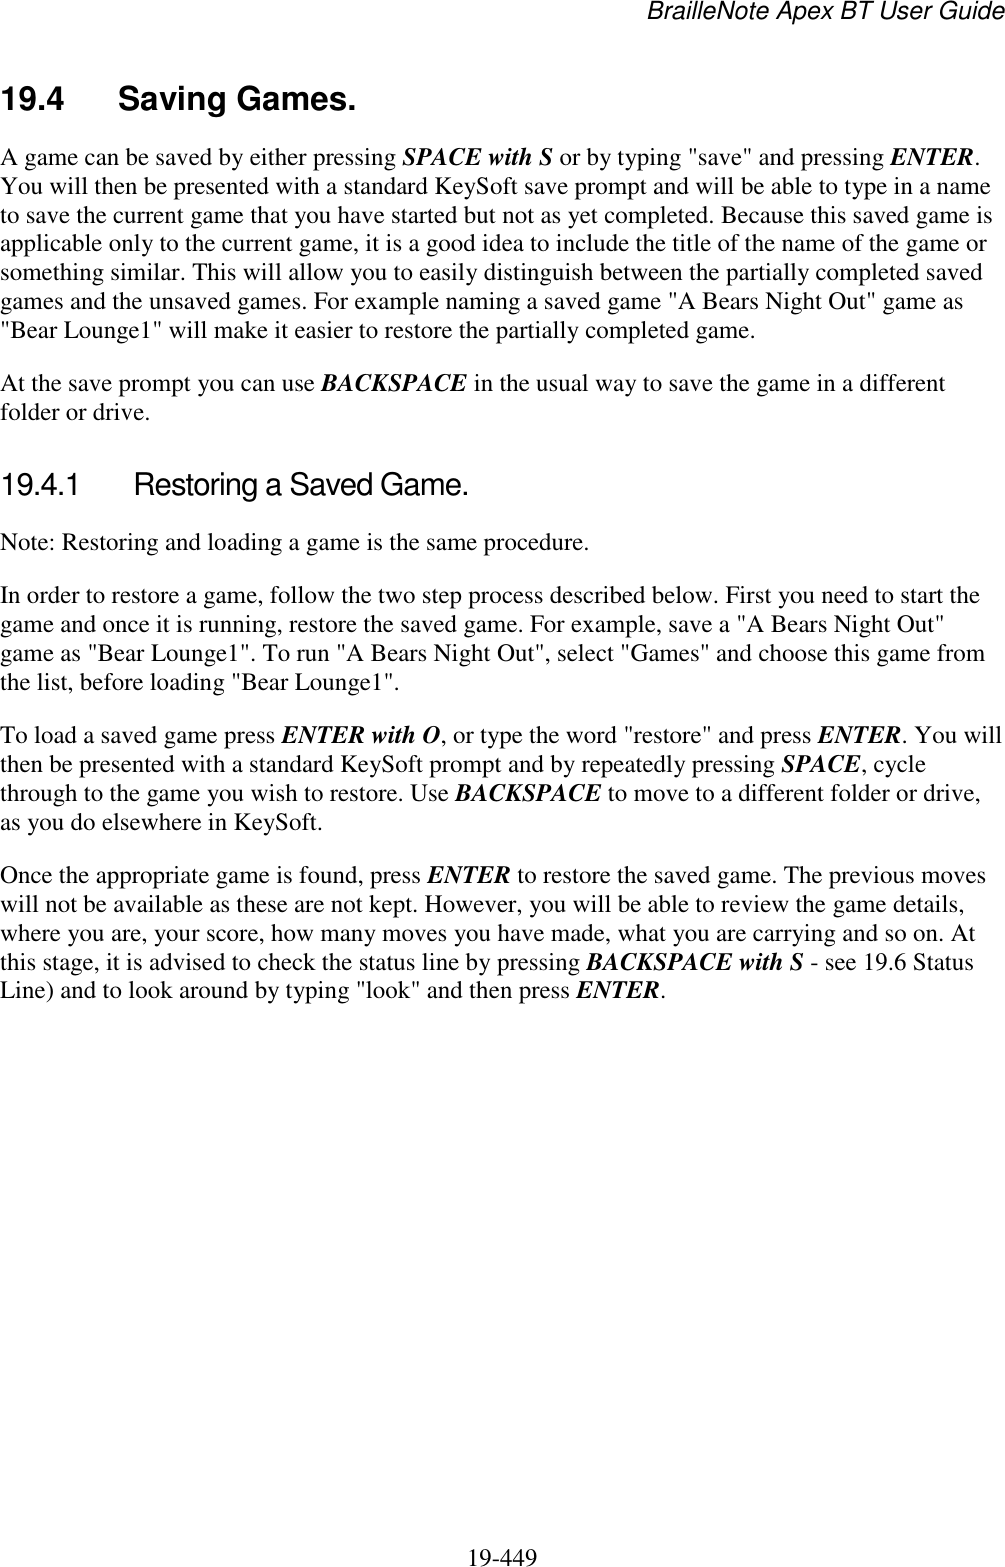 BrailleNote Apex BT User Guide   19-449   19.4  Saving Games. A game can be saved by either pressing SPACE with S or by typing &quot;save&quot; and pressing ENTER. You will then be presented with a standard KeySoft save prompt and will be able to type in a name to save the current game that you have started but not as yet completed. Because this saved game is applicable only to the current game, it is a good idea to include the title of the name of the game or something similar. This will allow you to easily distinguish between the partially completed saved games and the unsaved games. For example naming a saved game &quot;A Bears Night Out&quot; game as &quot;Bear Lounge1&quot; will make it easier to restore the partially completed game. At the save prompt you can use BACKSPACE in the usual way to save the game in a different folder or drive.  19.4.1  Restoring a Saved Game. Note: Restoring and loading a game is the same procedure. In order to restore a game, follow the two step process described below. First you need to start the game and once it is running, restore the saved game. For example, save a &quot;A Bears Night Out&quot; game as &quot;Bear Lounge1&quot;. To run &quot;A Bears Night Out&quot;, select &quot;Games&quot; and choose this game from the list, before loading &quot;Bear Lounge1&quot;. To load a saved game press ENTER with O, or type the word &quot;restore&quot; and press ENTER. You will then be presented with a standard KeySoft prompt and by repeatedly pressing SPACE, cycle through to the game you wish to restore. Use BACKSPACE to move to a different folder or drive, as you do elsewhere in KeySoft.  Once the appropriate game is found, press ENTER to restore the saved game. The previous moves will not be available as these are not kept. However, you will be able to review the game details, where you are, your score, how many moves you have made, what you are carrying and so on. At this stage, it is advised to check the status line by pressing BACKSPACE with S - see 19.6 Status Line) and to look around by typing &quot;look&quot; and then press ENTER.  